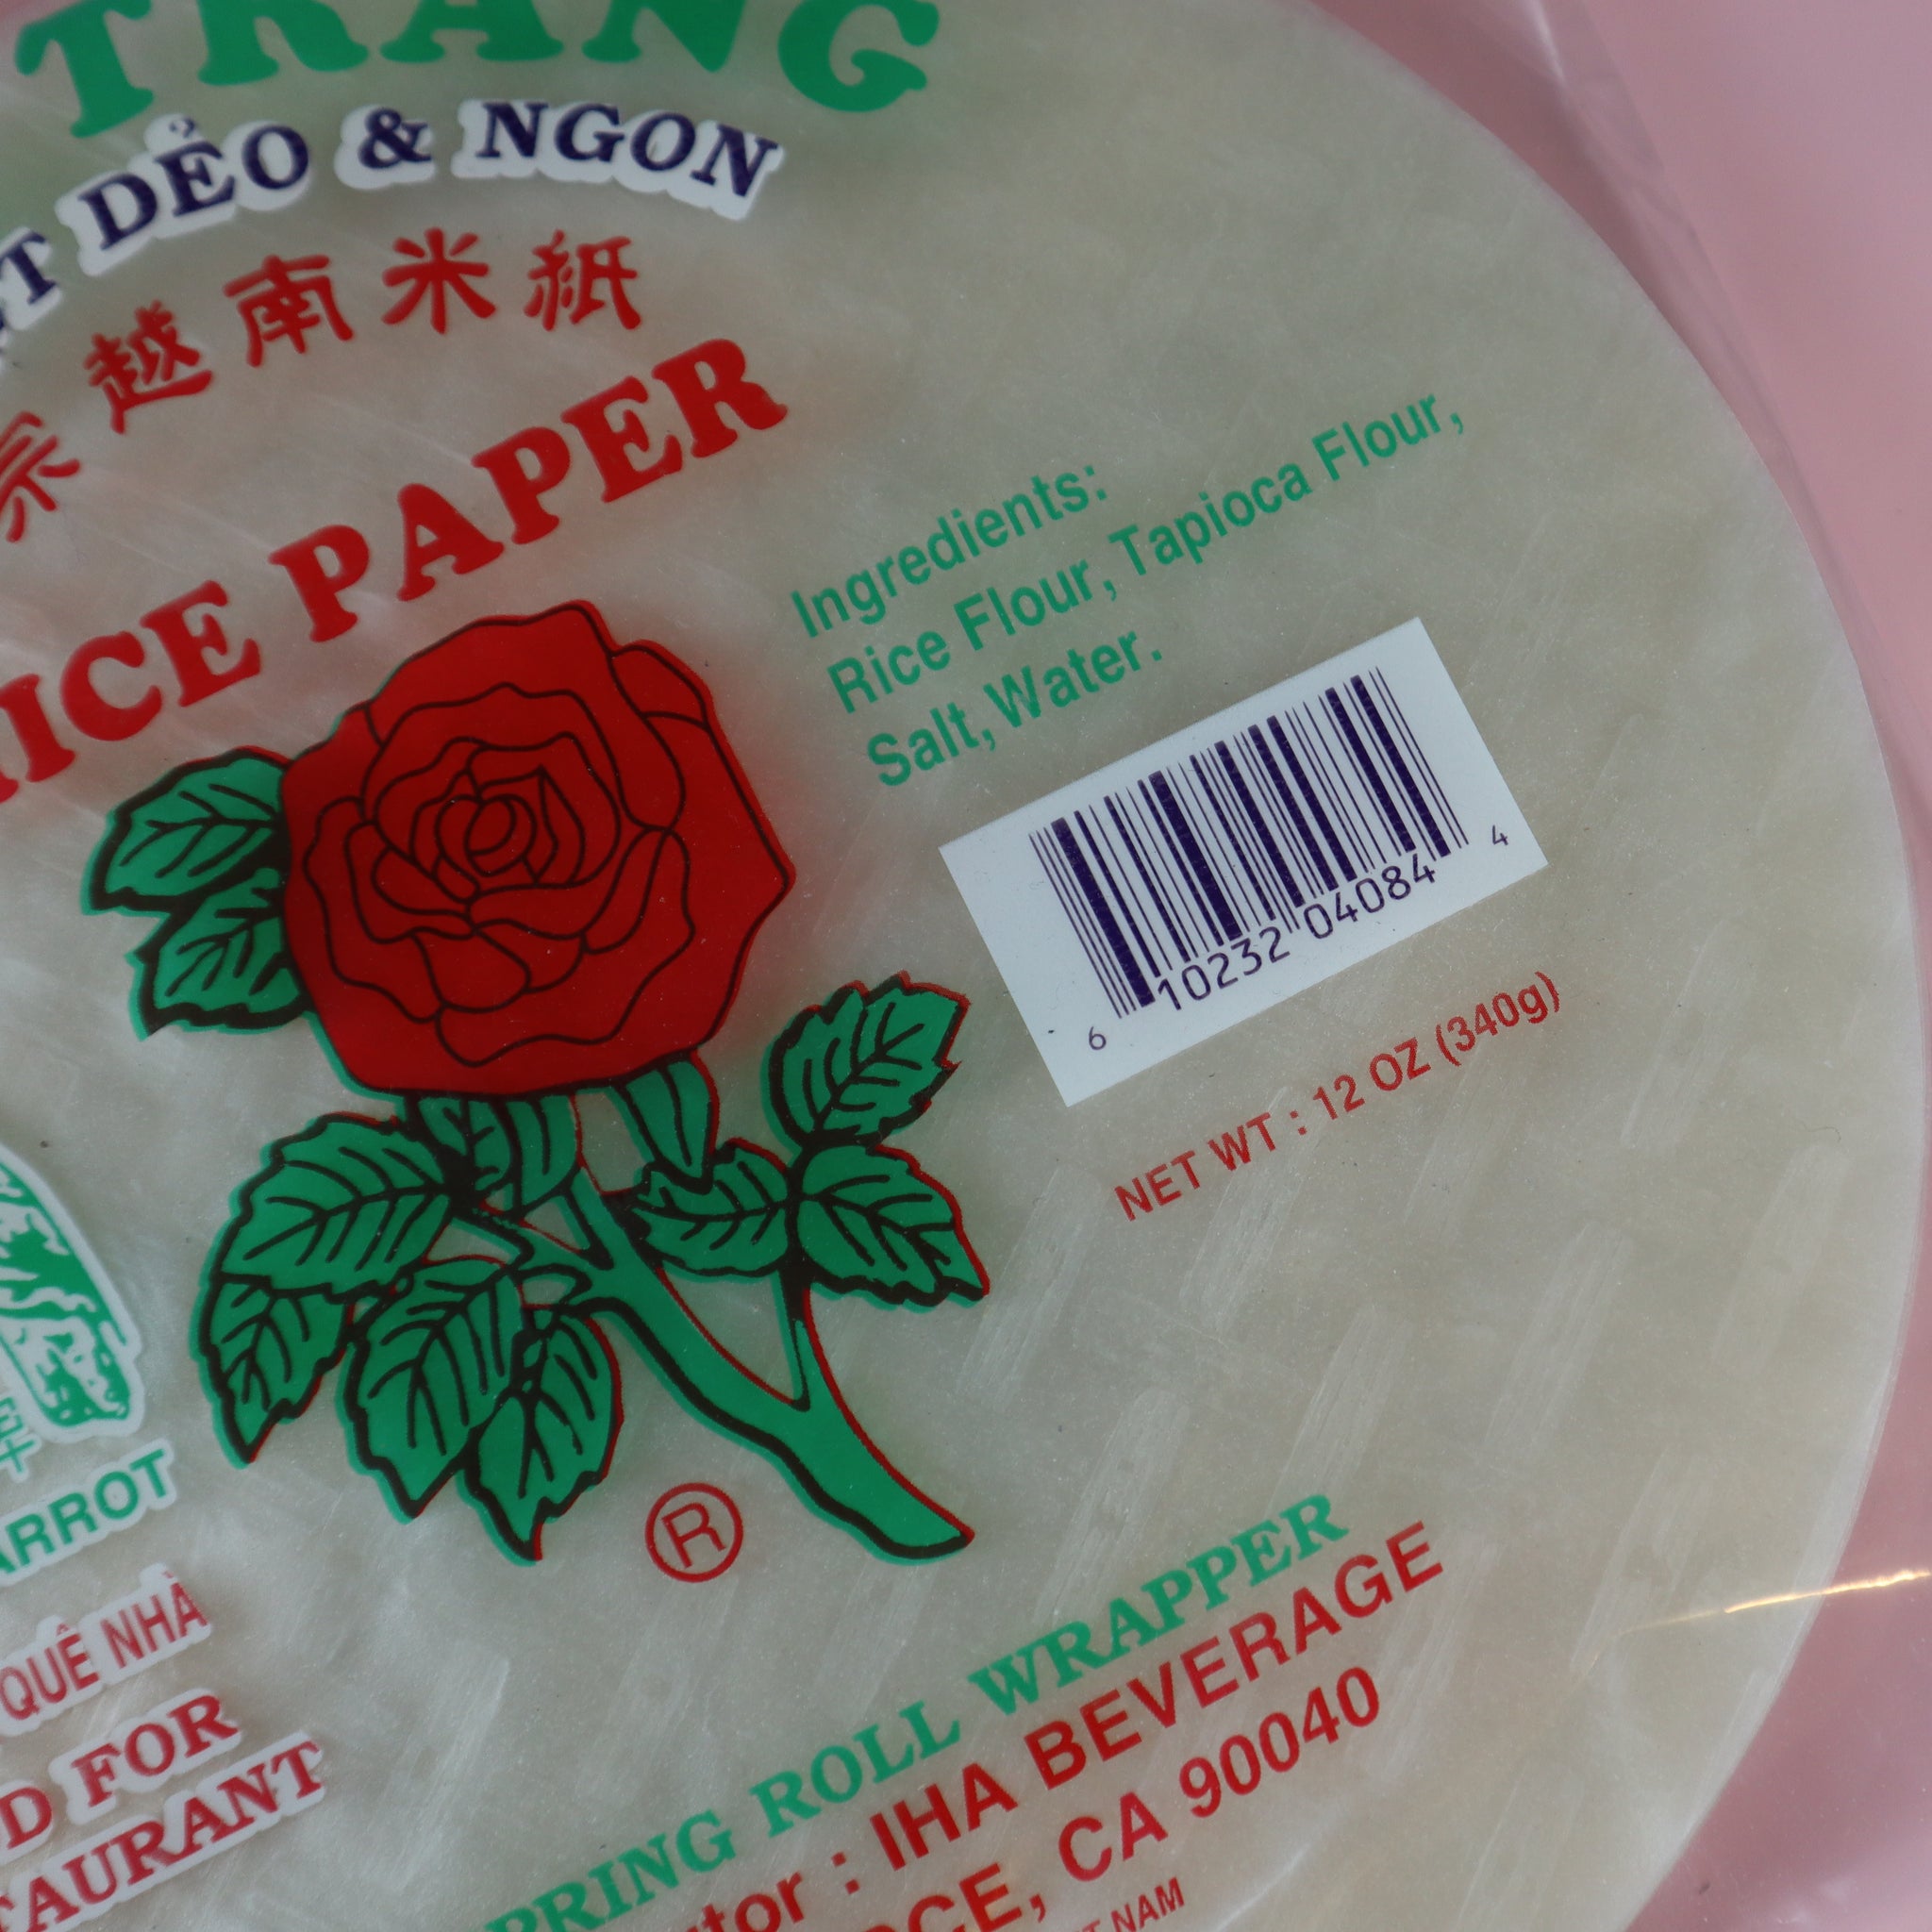 DOUBLE PARROT ROSE BRAND FRESH SPRING ROLL RICE PAPER WRAPPER (22 CM)